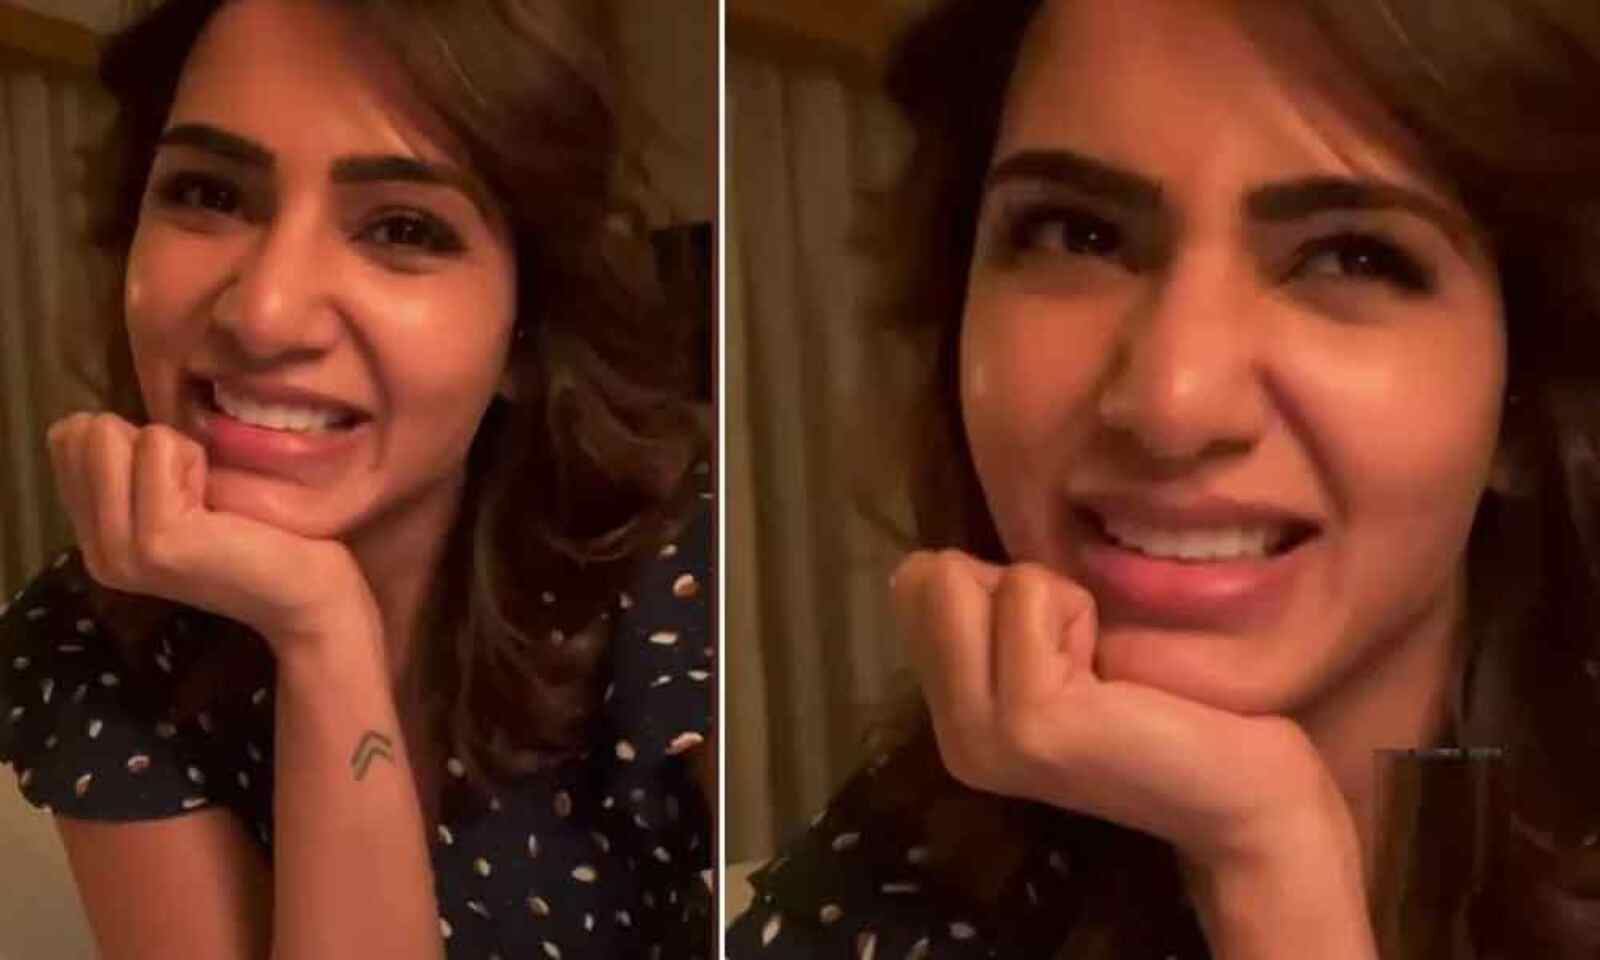 Samantha hits 15 million followers on Instagram, thanks fans for all the  love - India Today